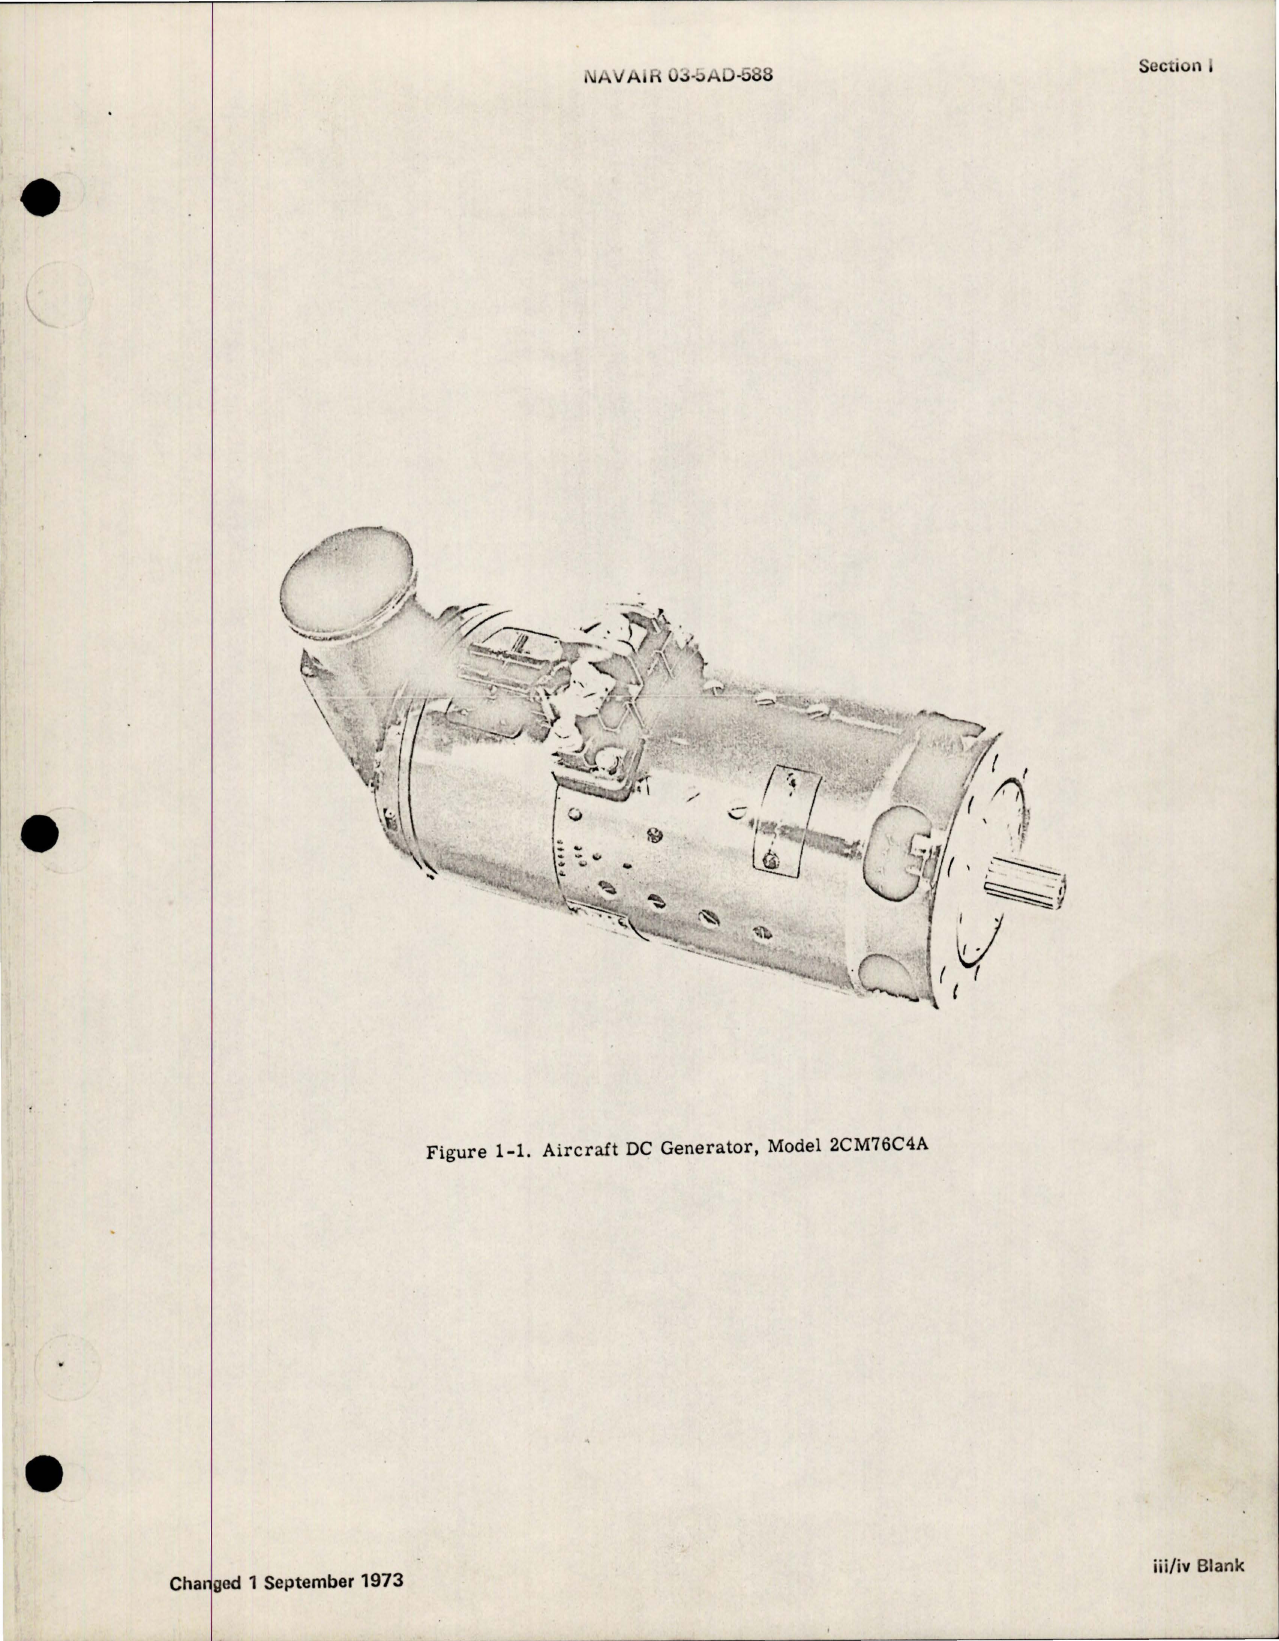 Sample page 5 from AirCorps Library document: Service and Overhaul Instructions for DC Generator - Models: 2CM76C4, 2CM76C4A, 2CM76E4, 2CM76E4C, and 2CM76E5